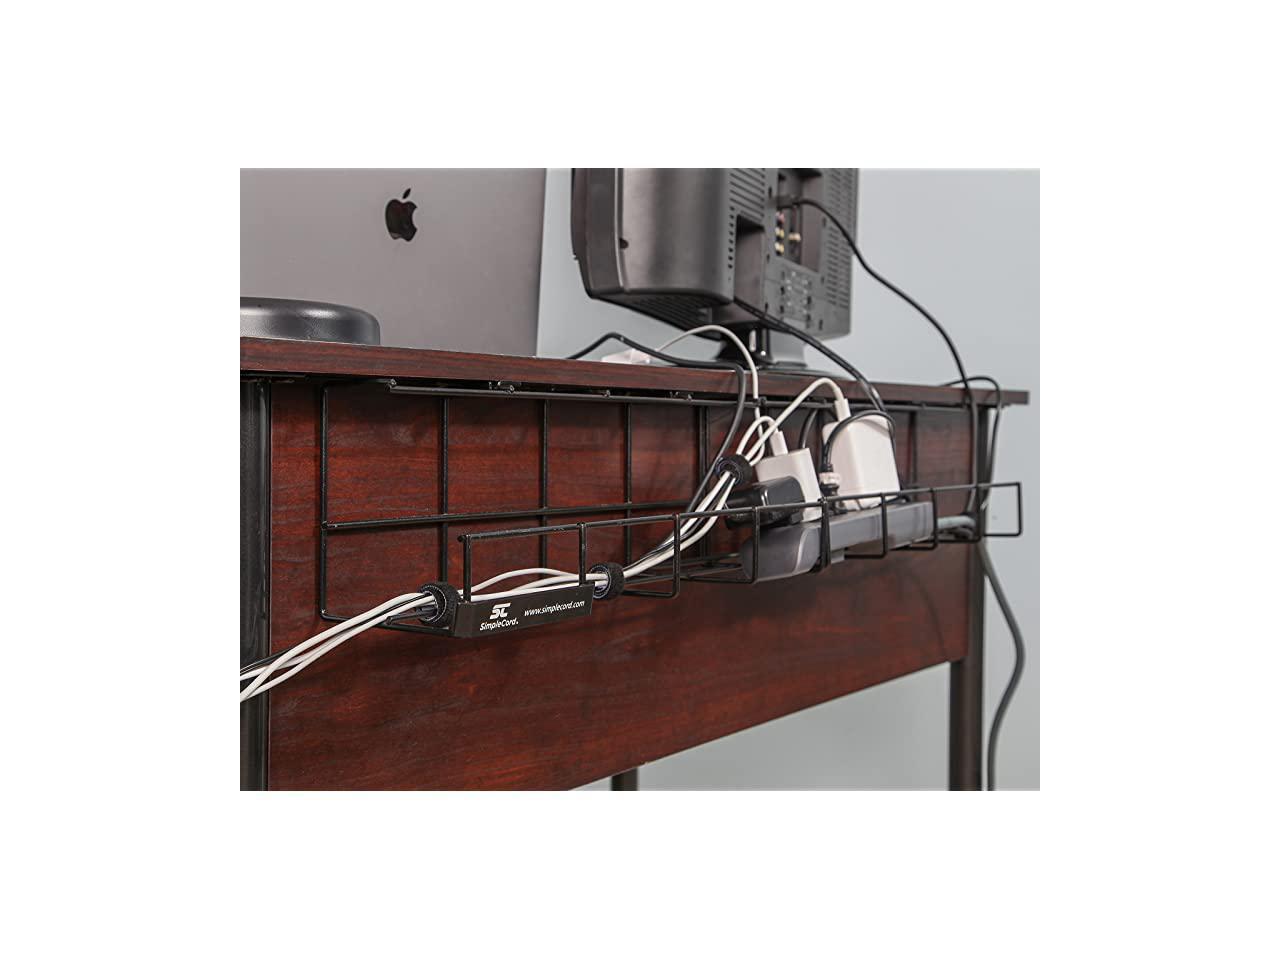 Tray Desk Cable Organizer 32quot Open Slot Raceway to Hold Cables Cords ...